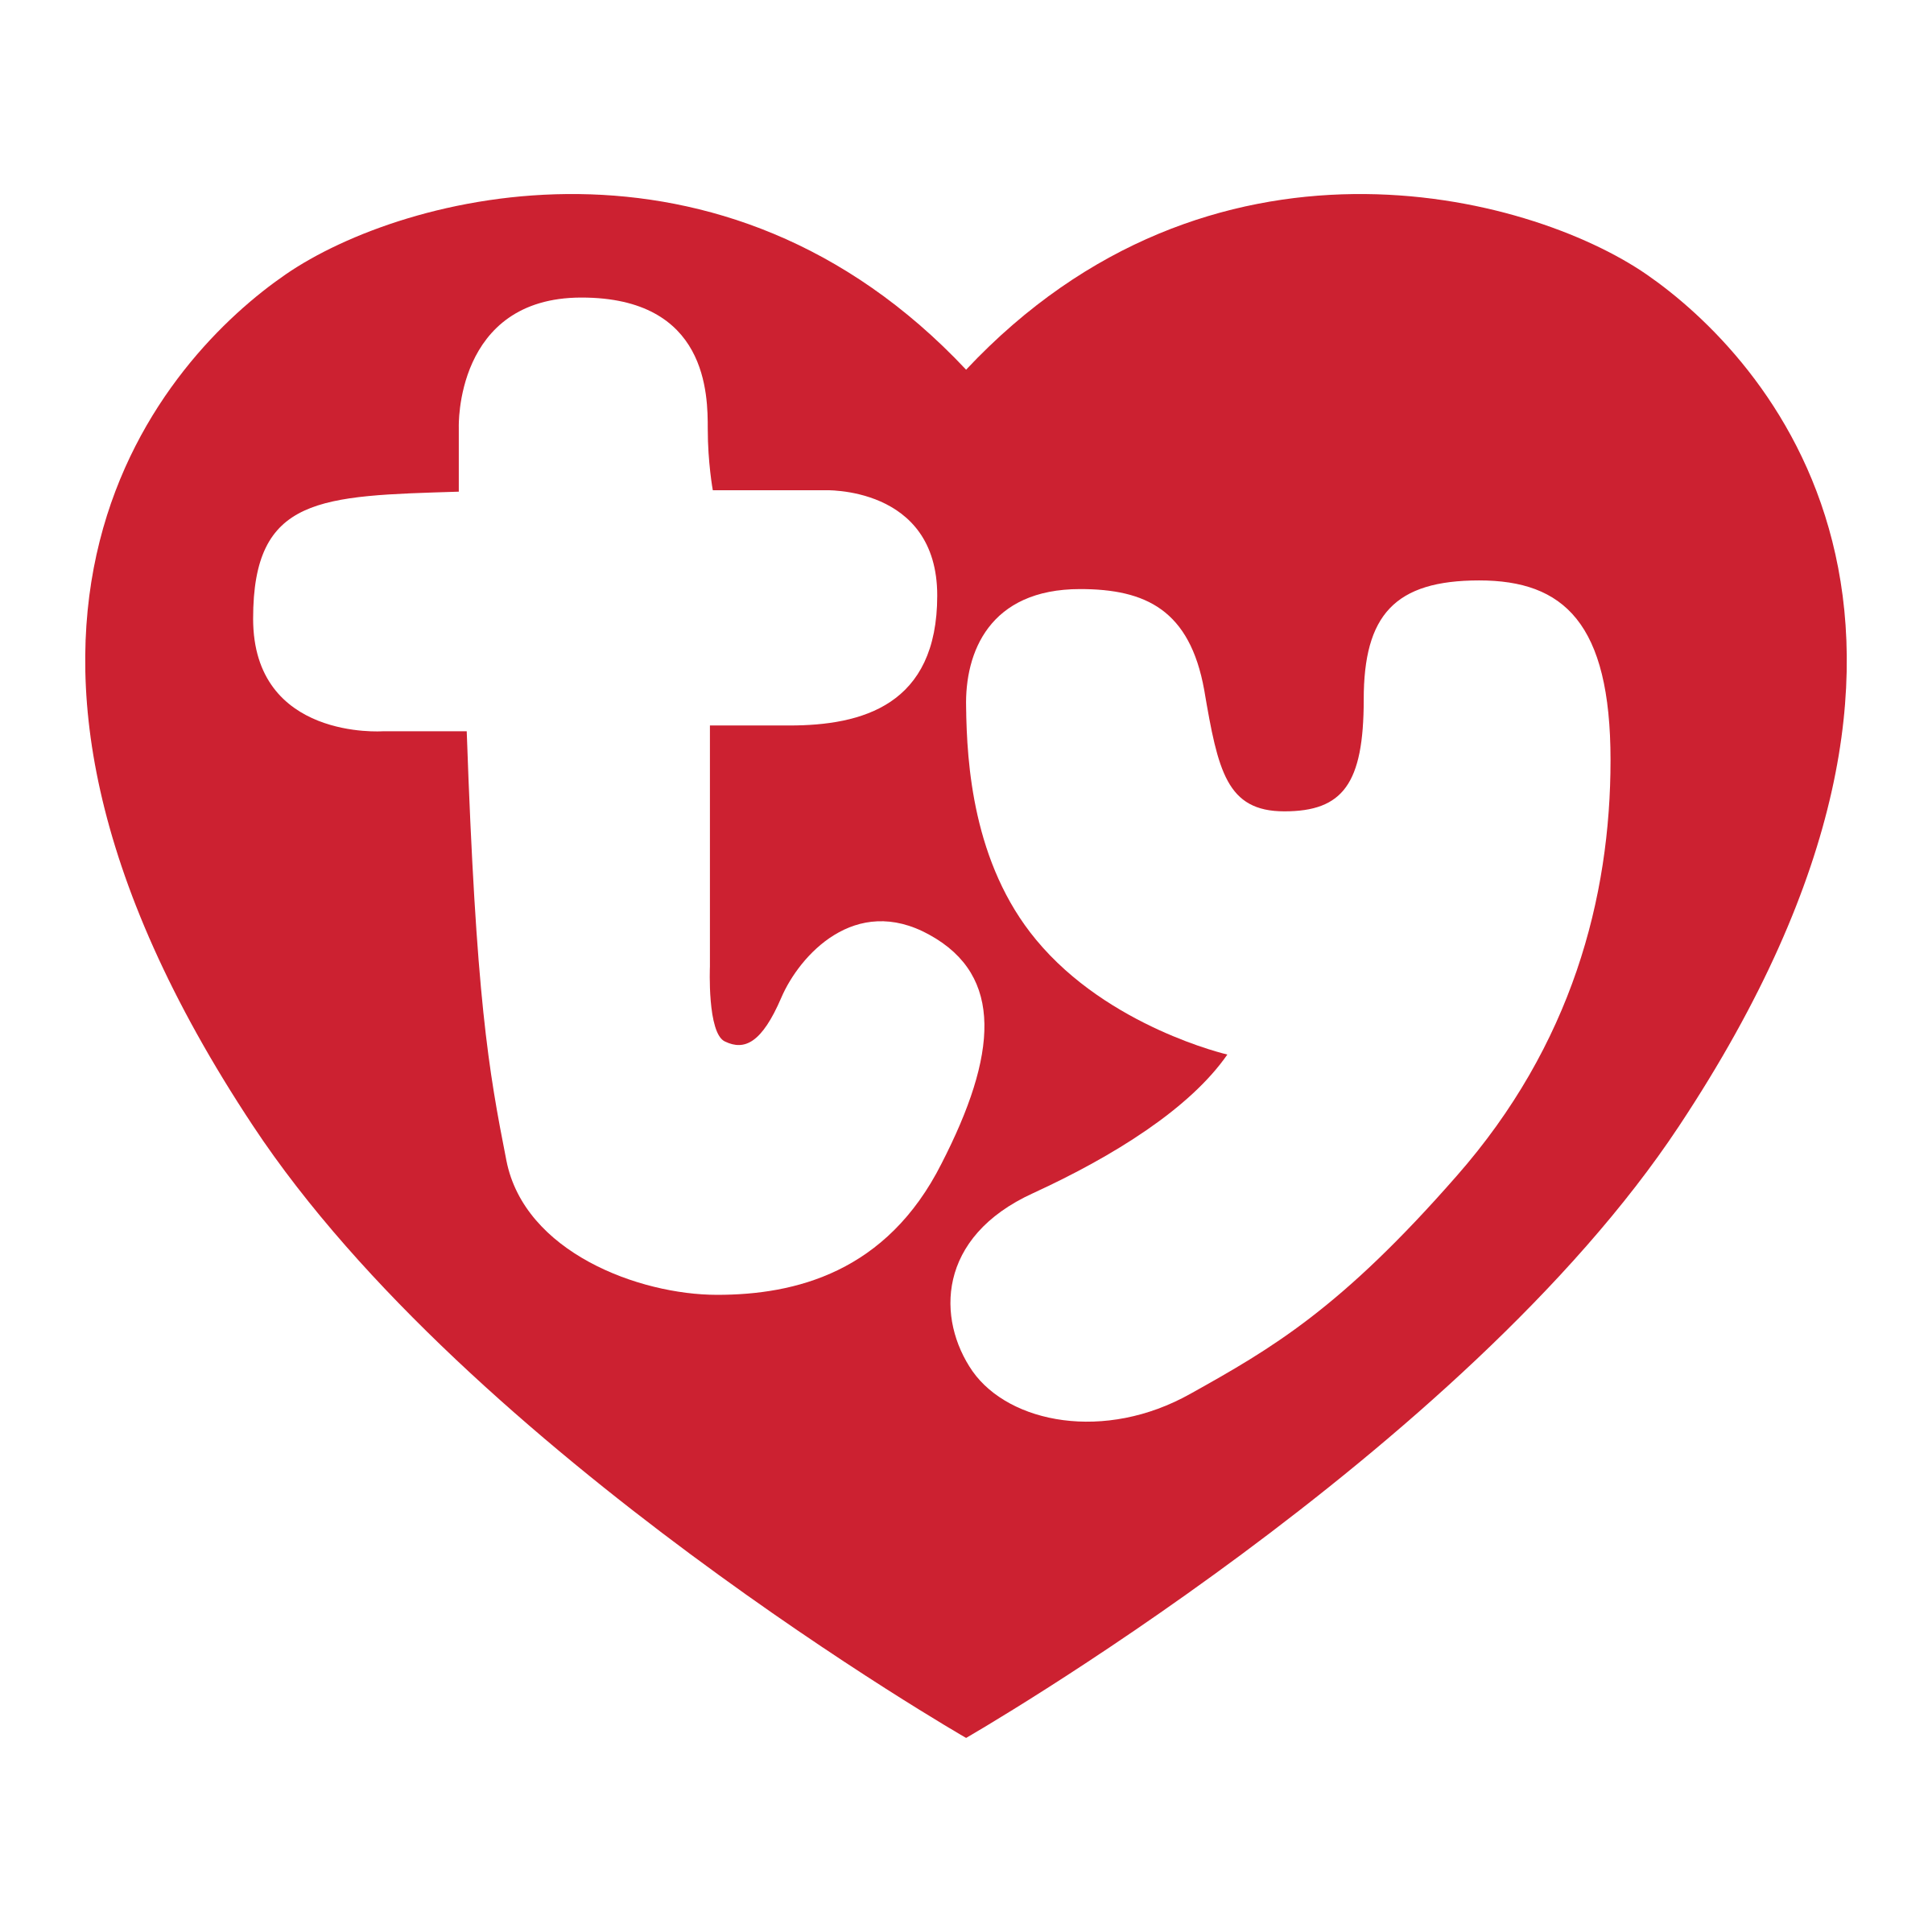 Ty Logo - Ty Logo PNG Transparent & SVG Vector - Freebie Supply